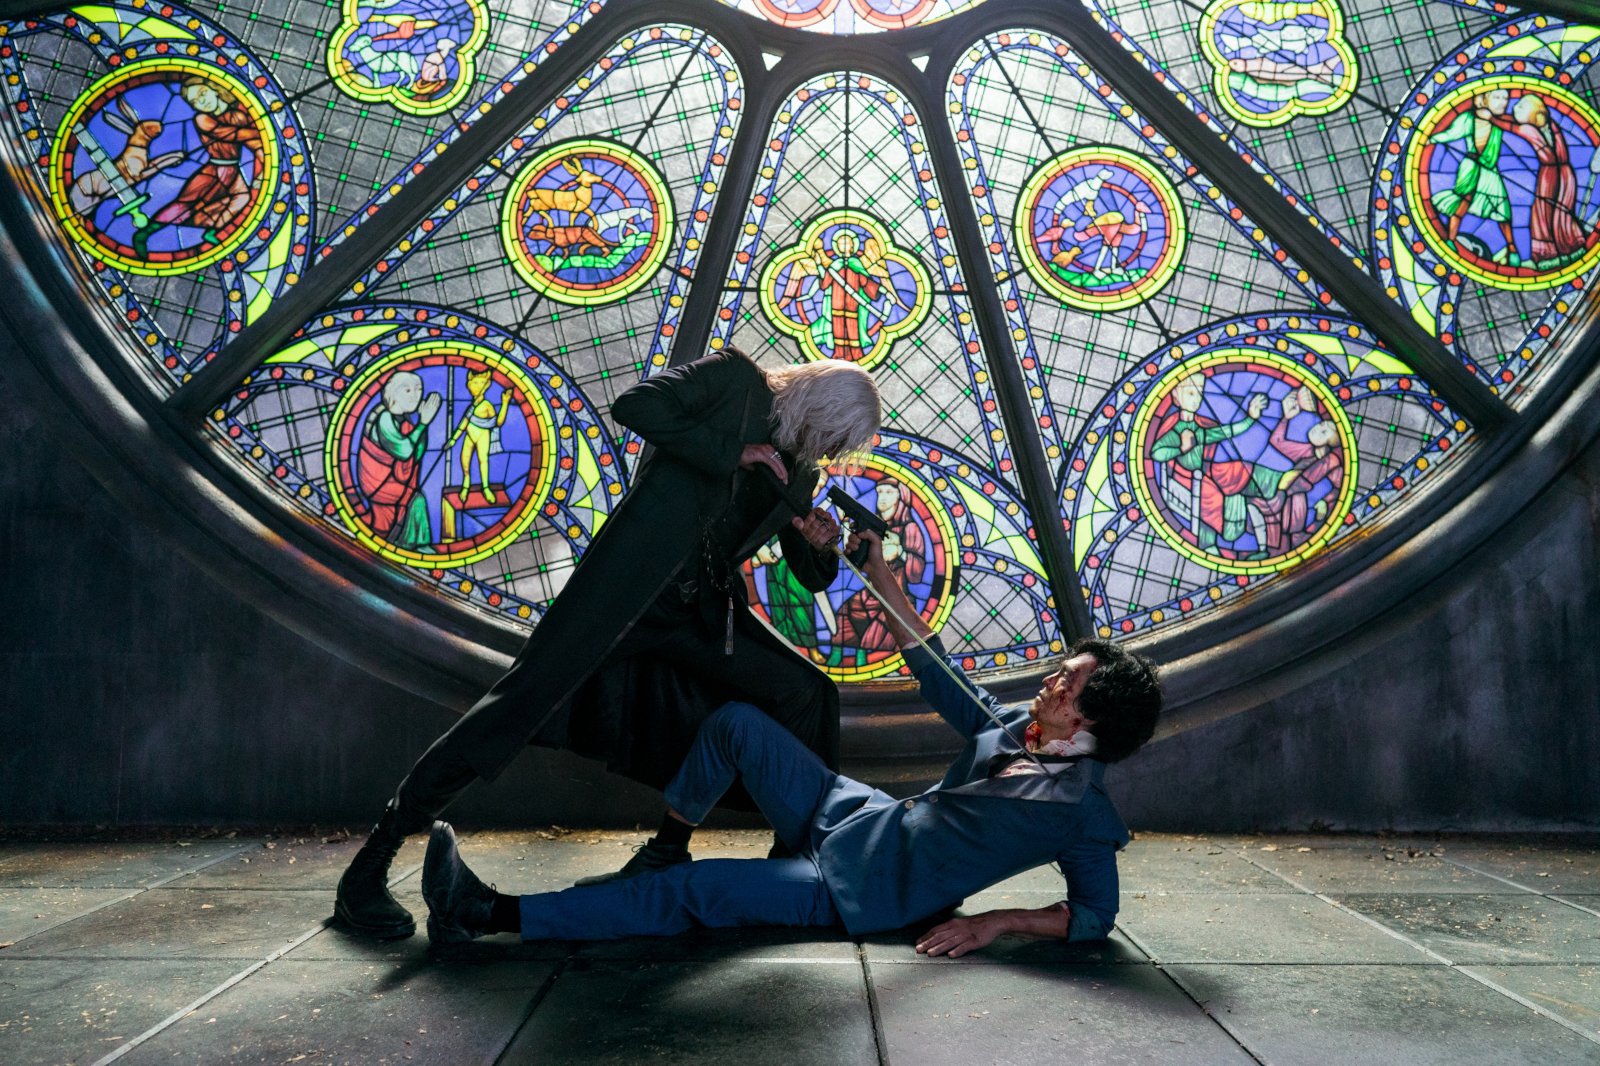 Vicious and Spike Spiegel fight in front of a stain-glass window in Netflix's live-action 'Cowboy Bebop' series.